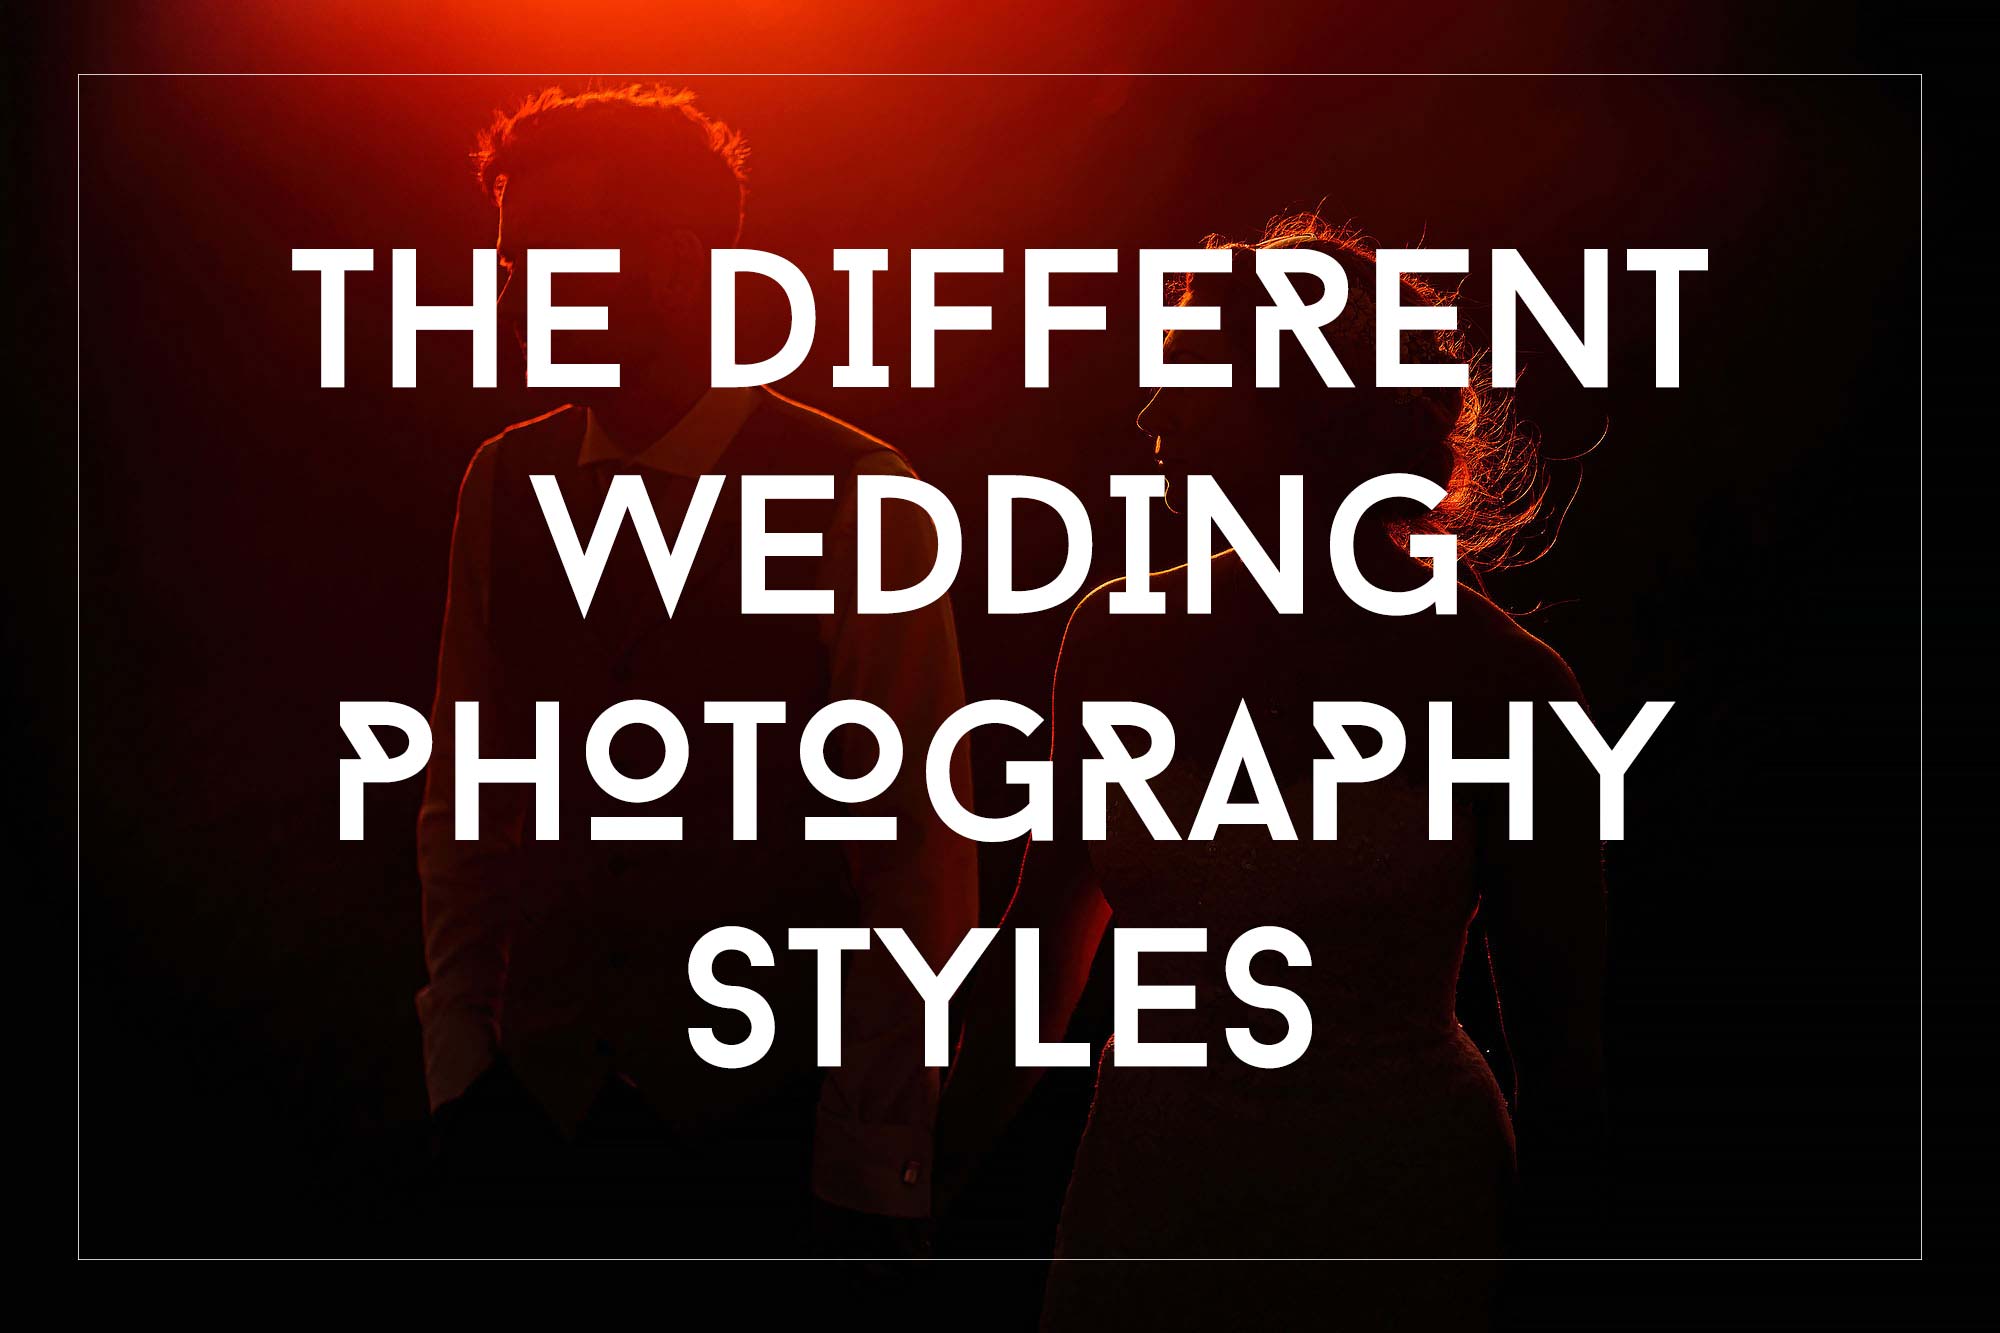 The different styles of wedding photography